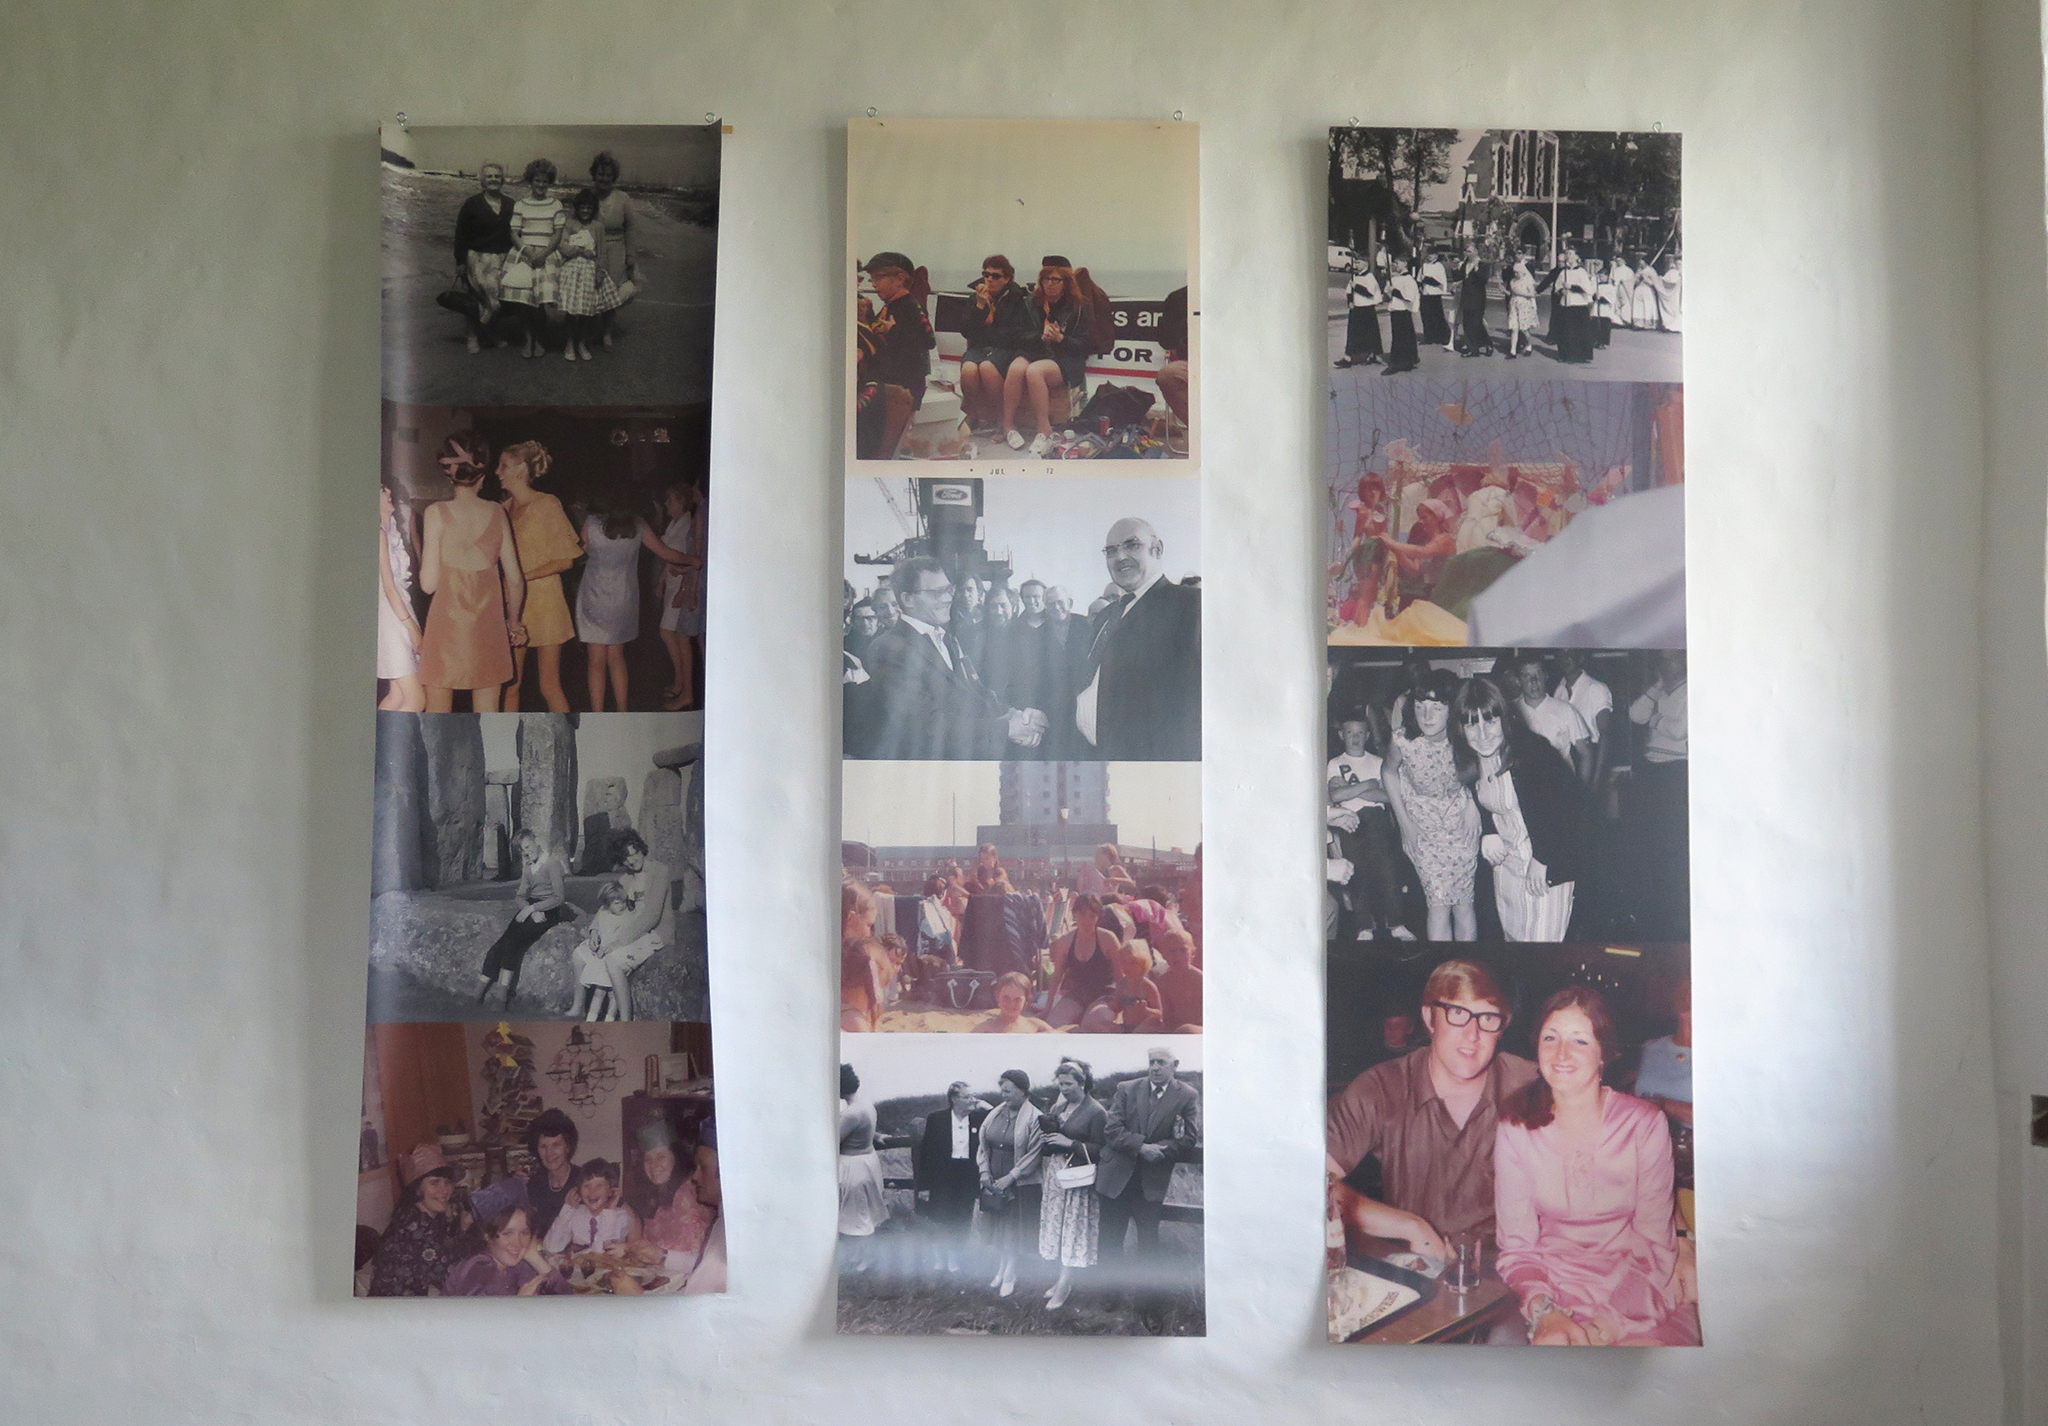 Three large hanging banners with historical photographs of Barking residents